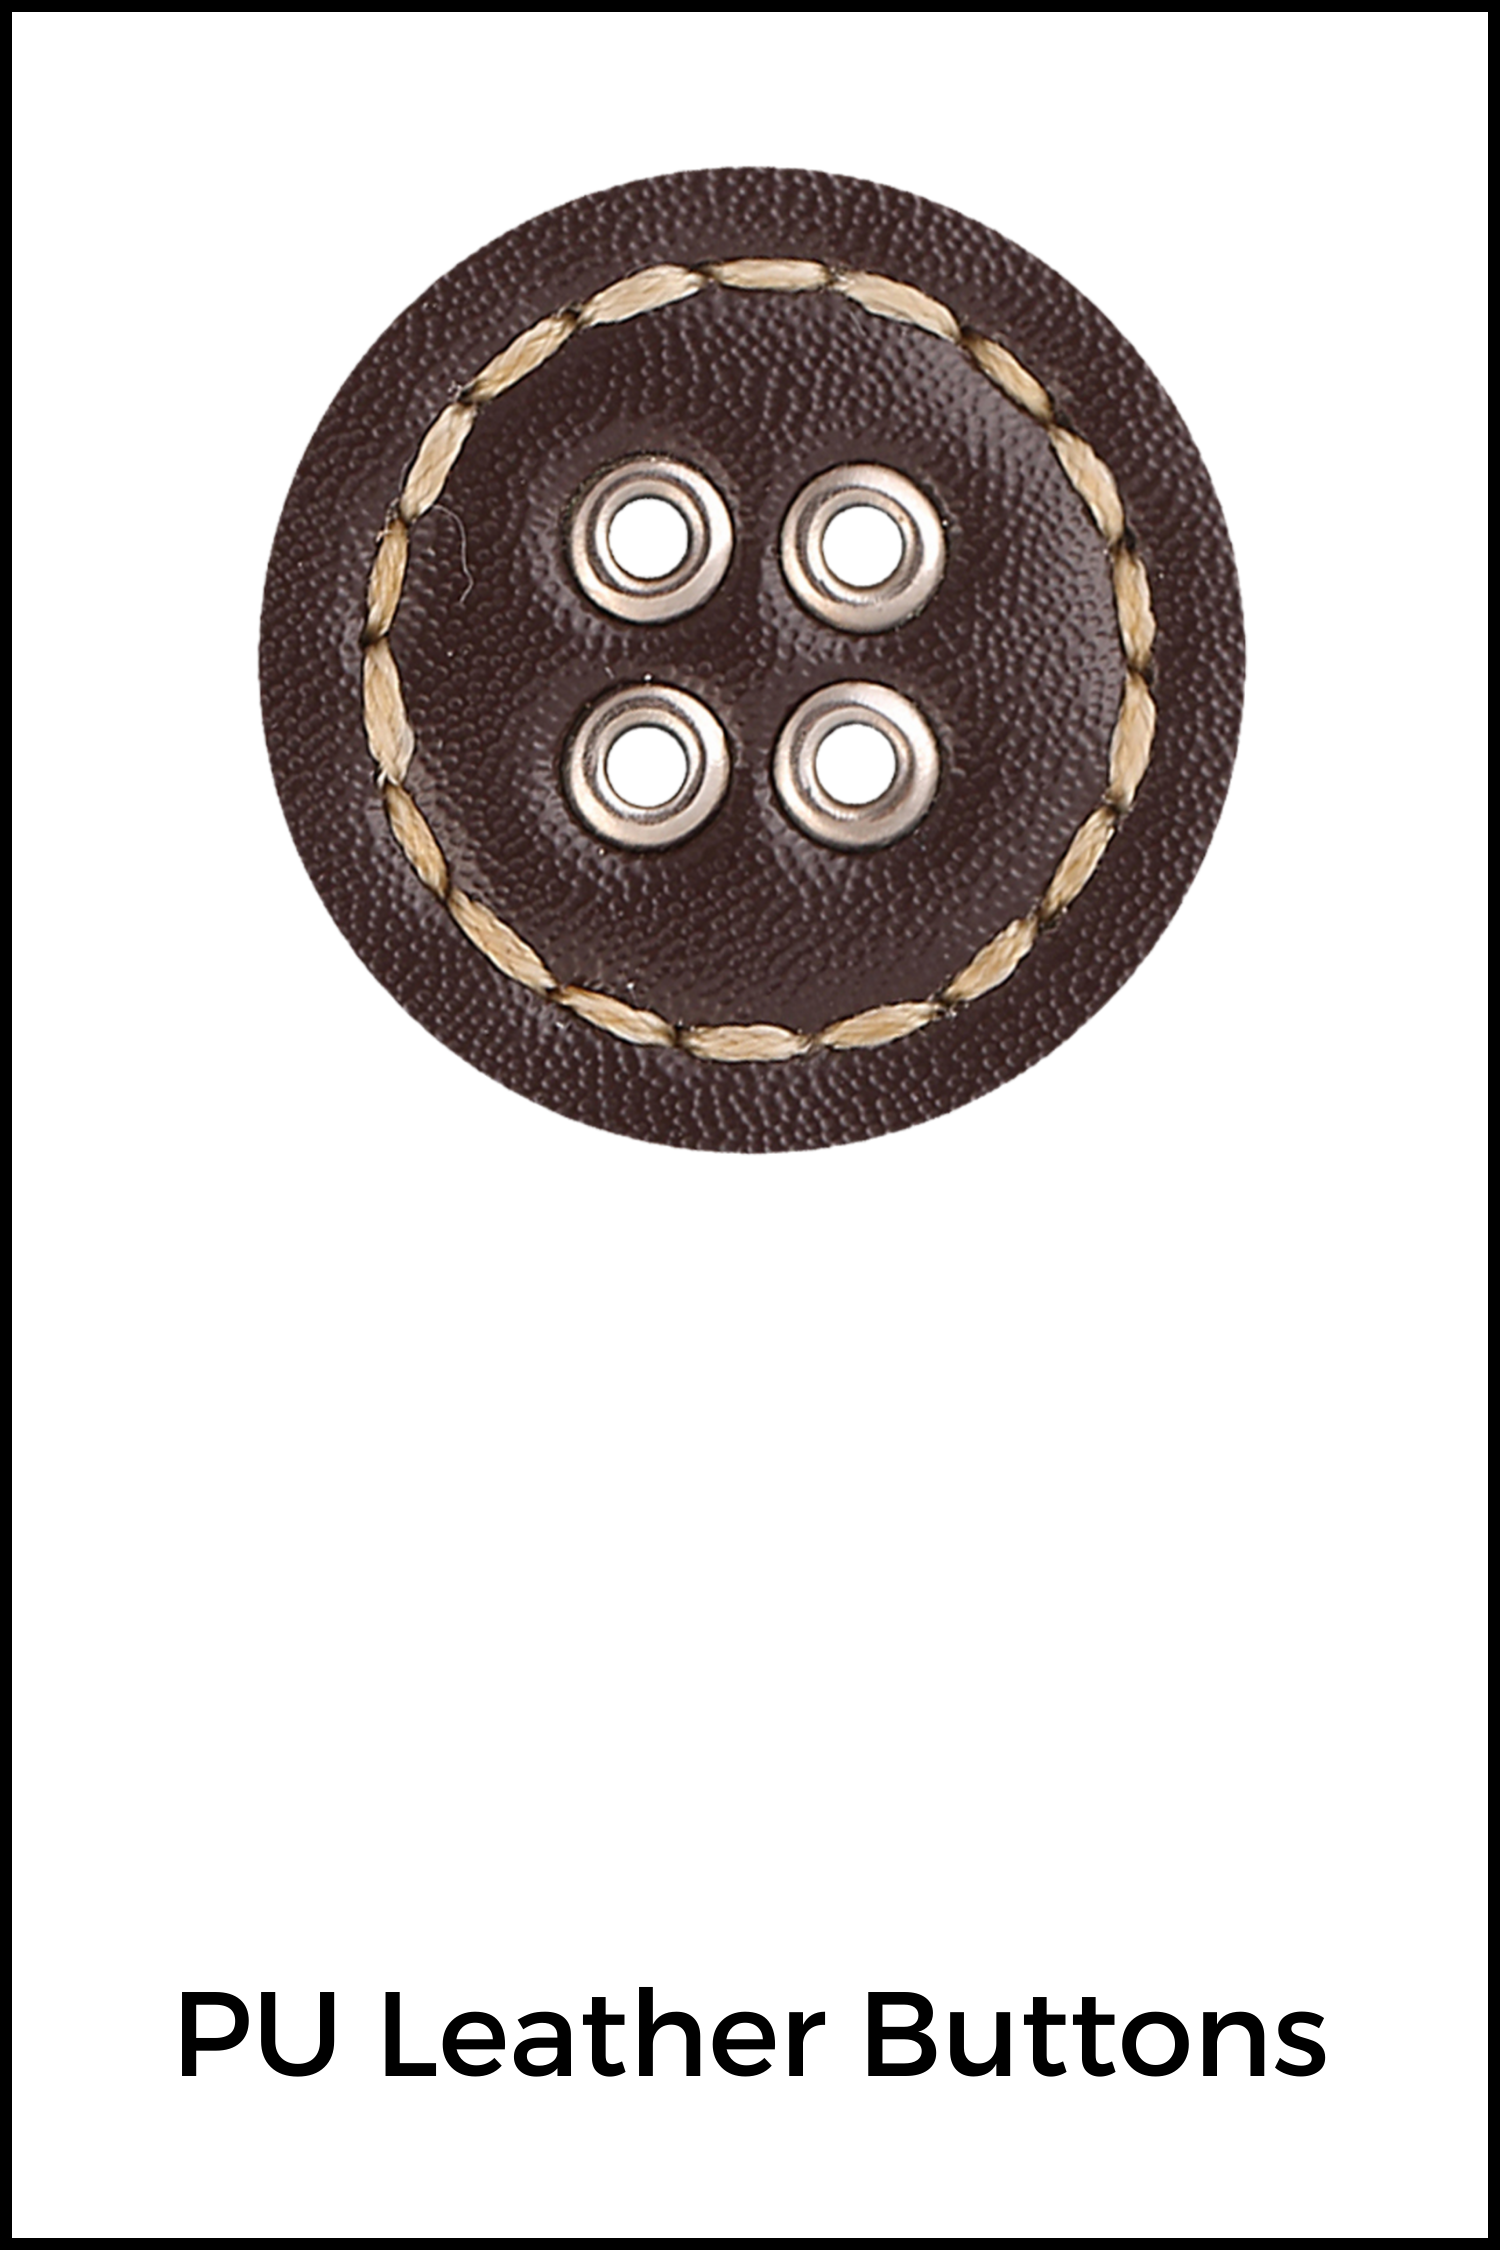 PU Leather Buttons